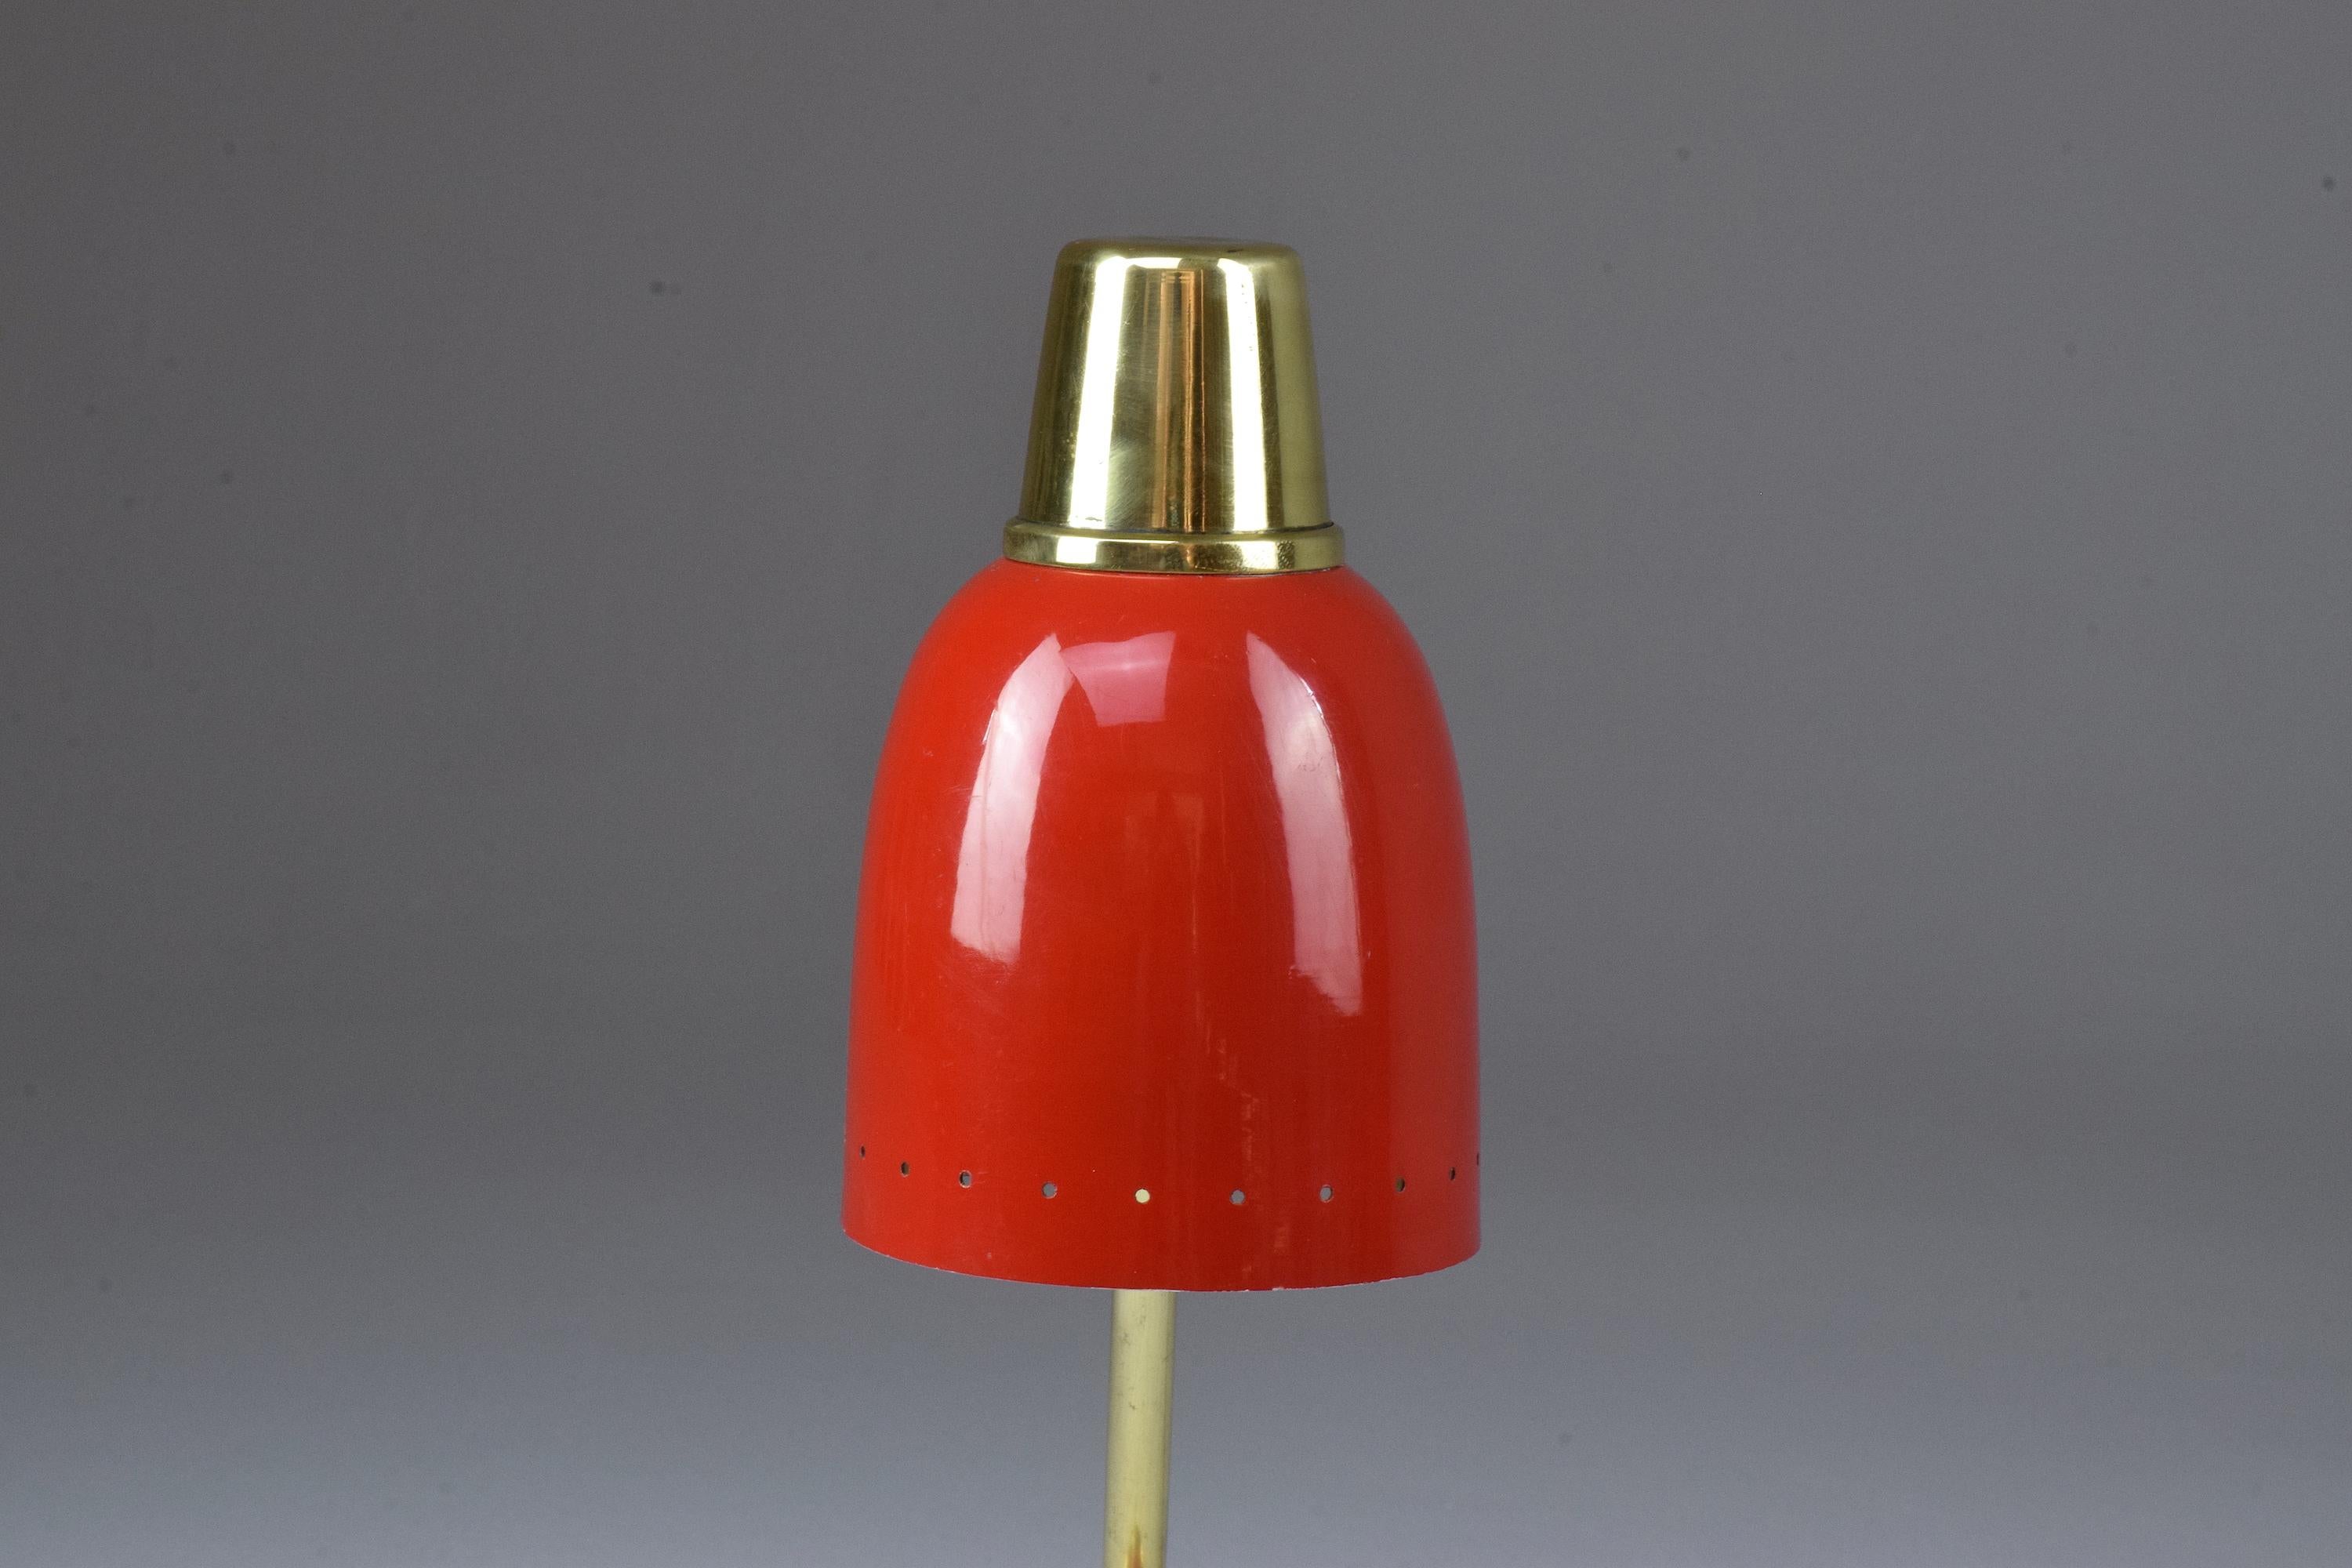 Italian Midcentury Table Lamp in the style of Stilnovo, 1950s For Sale 2